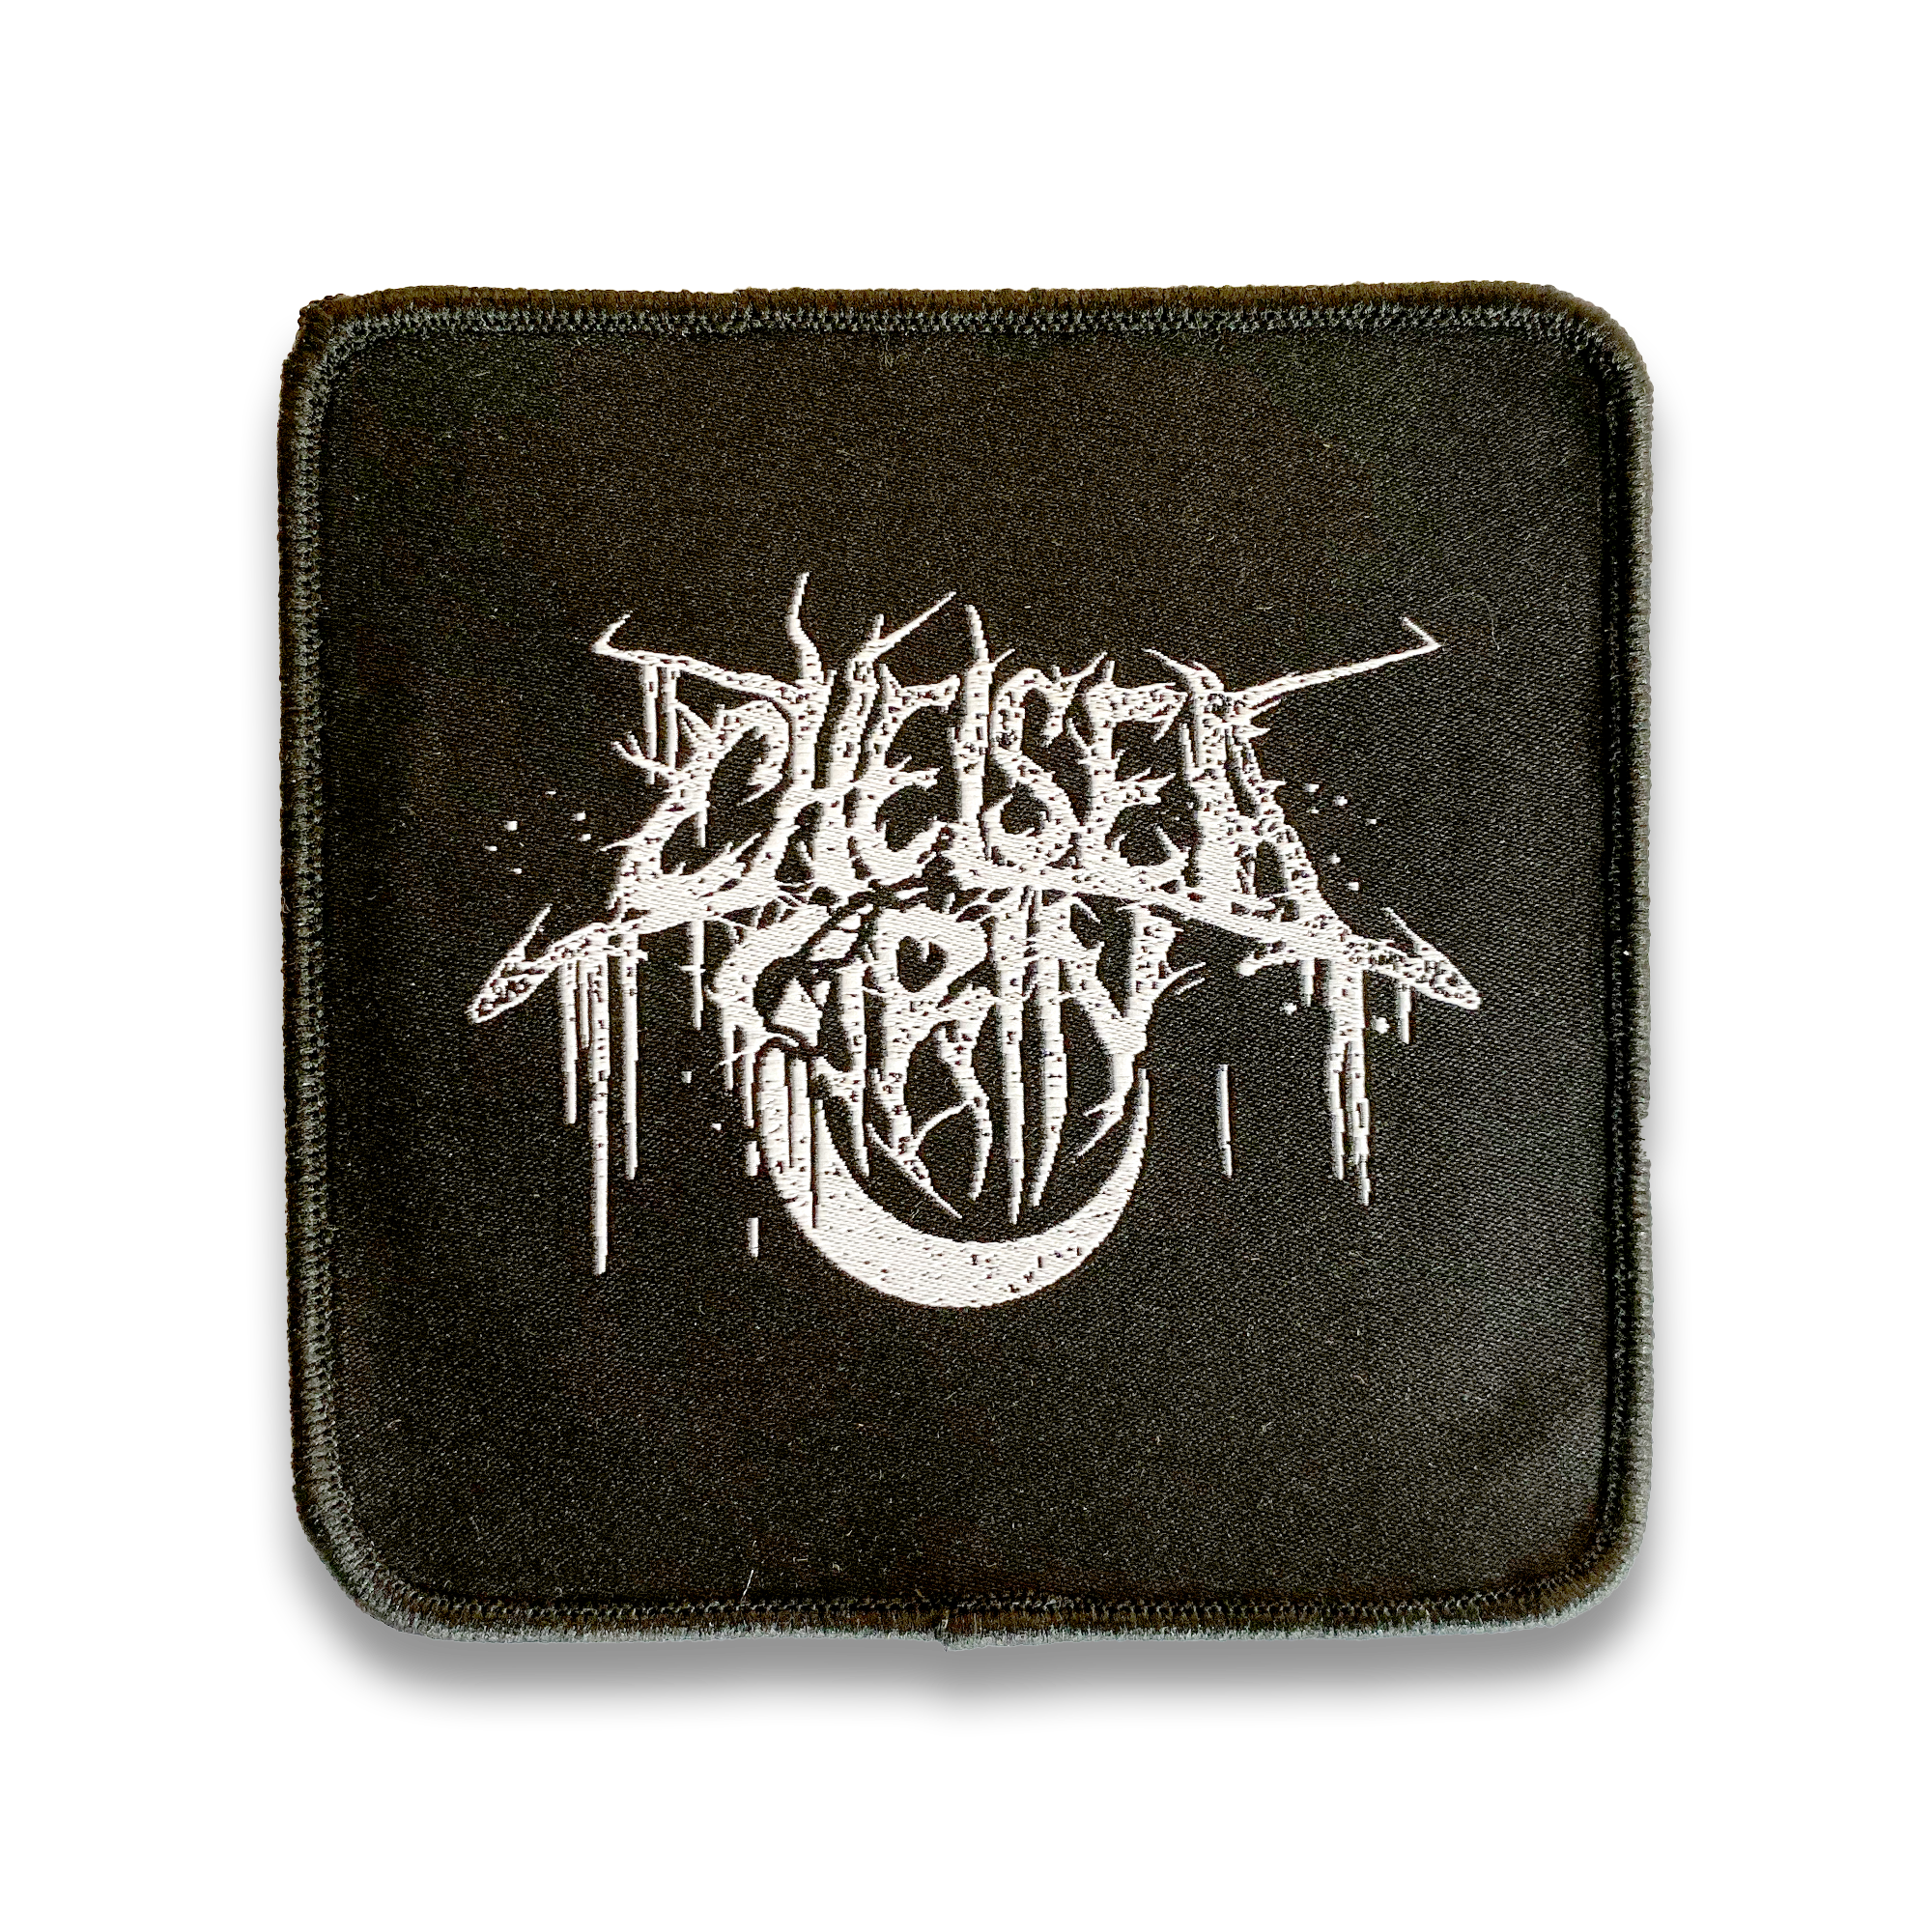 Chelsea Grin - Patch